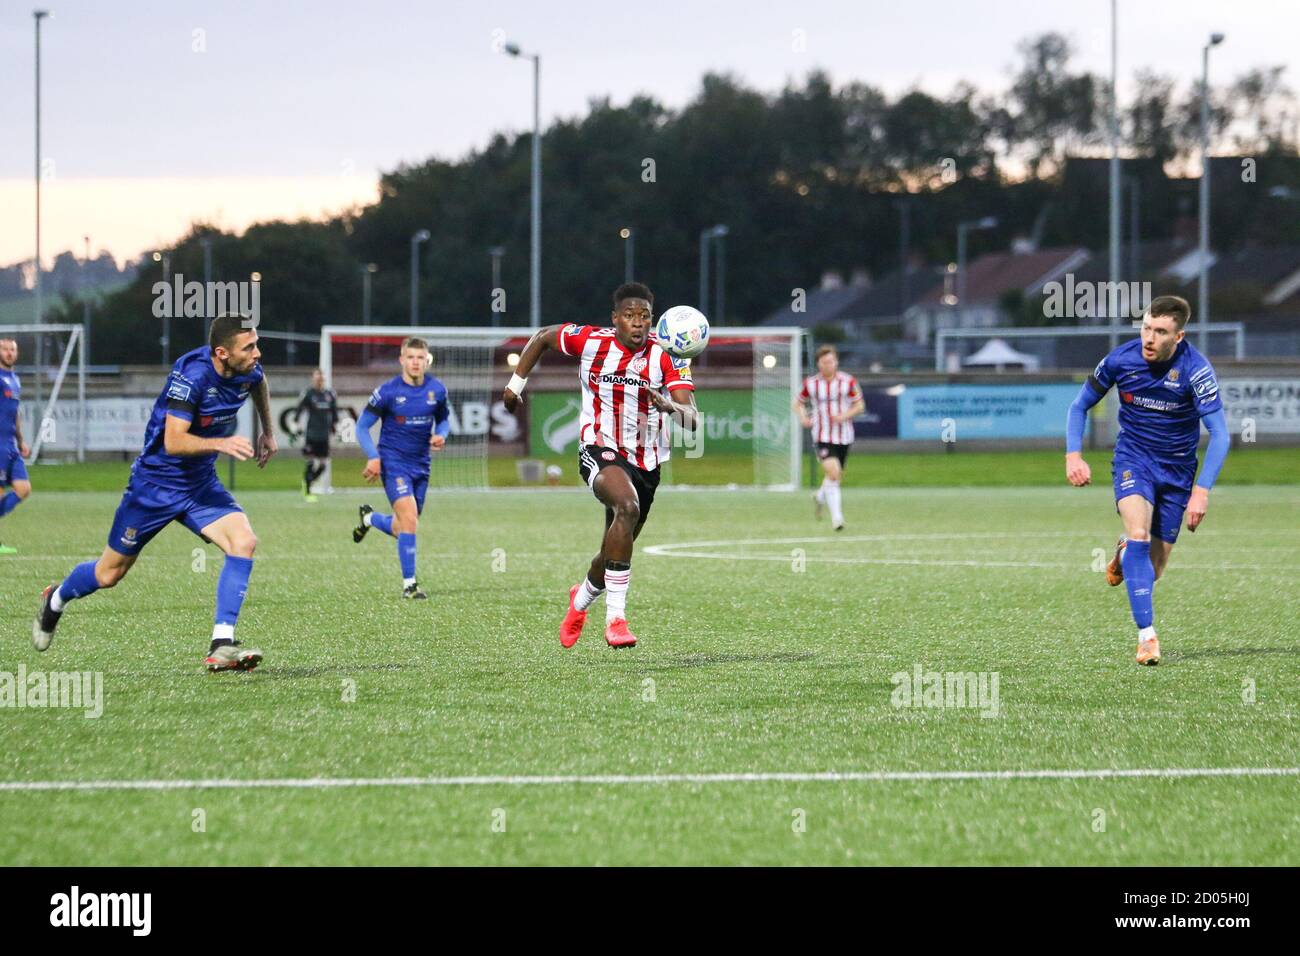 IBRAHIM MEITE (Derry City FC)  during the Airtricity League fixture between Derry City & Waterford 02-10-2020 Photo by Kevin Moore/Maiden City Images Stock Photo